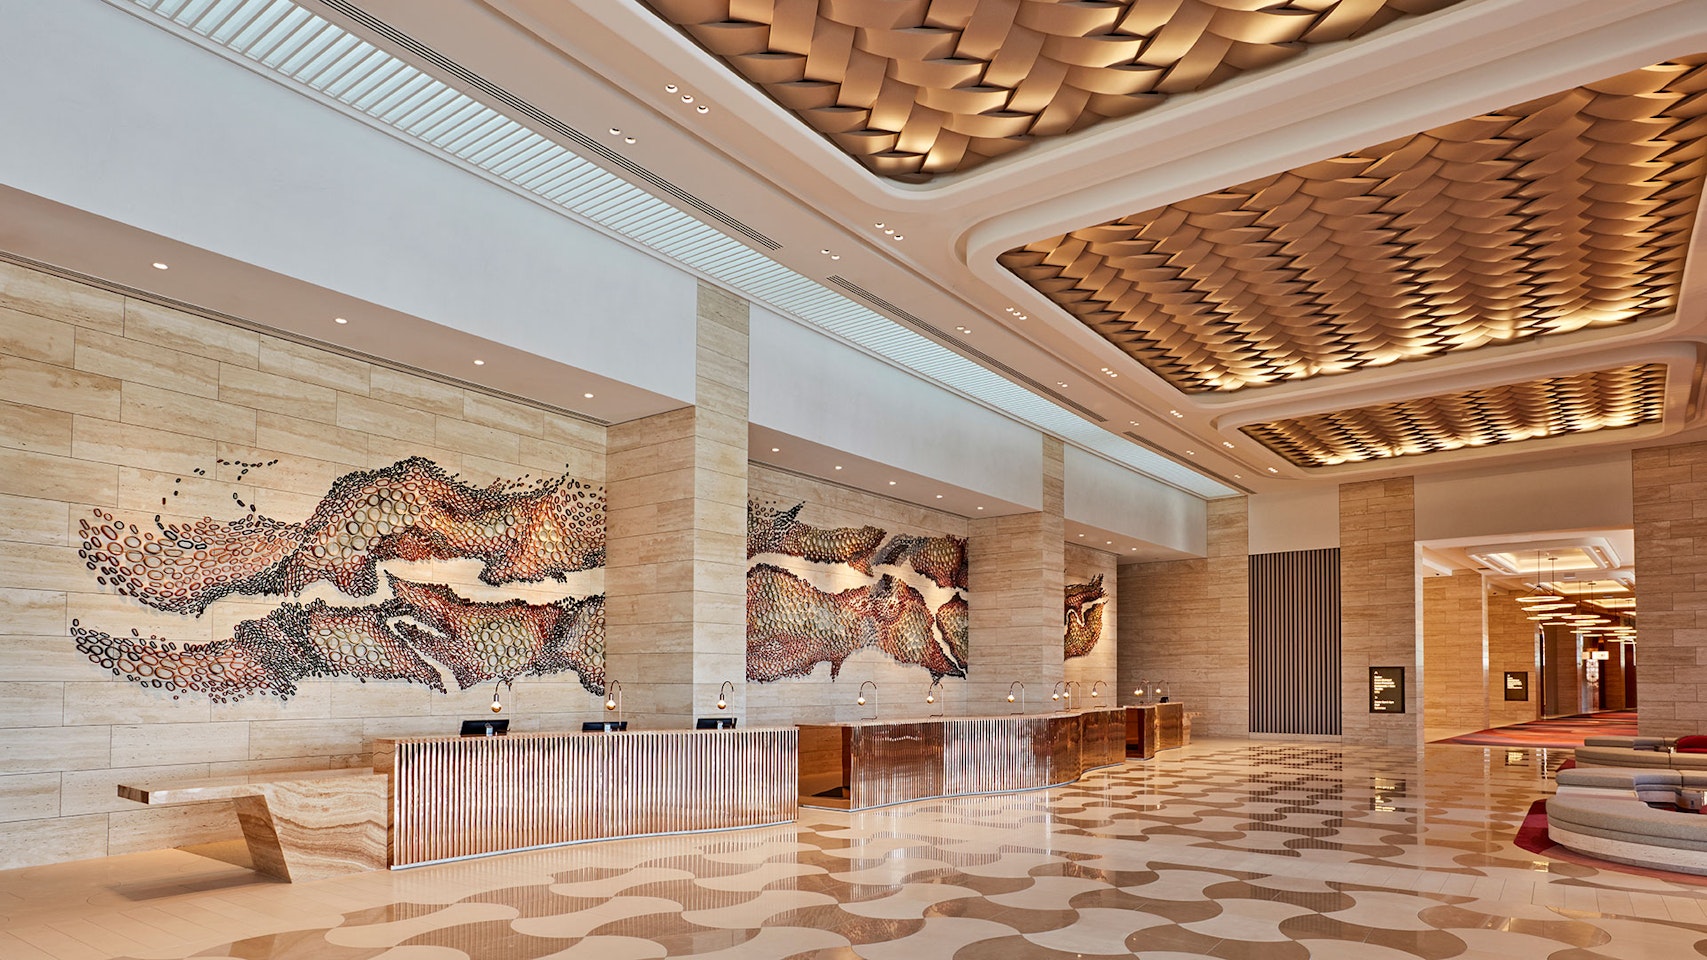 Aris LED linear floodlight in application, installed in Crown Casino in Perth. Architectural LED lighting.